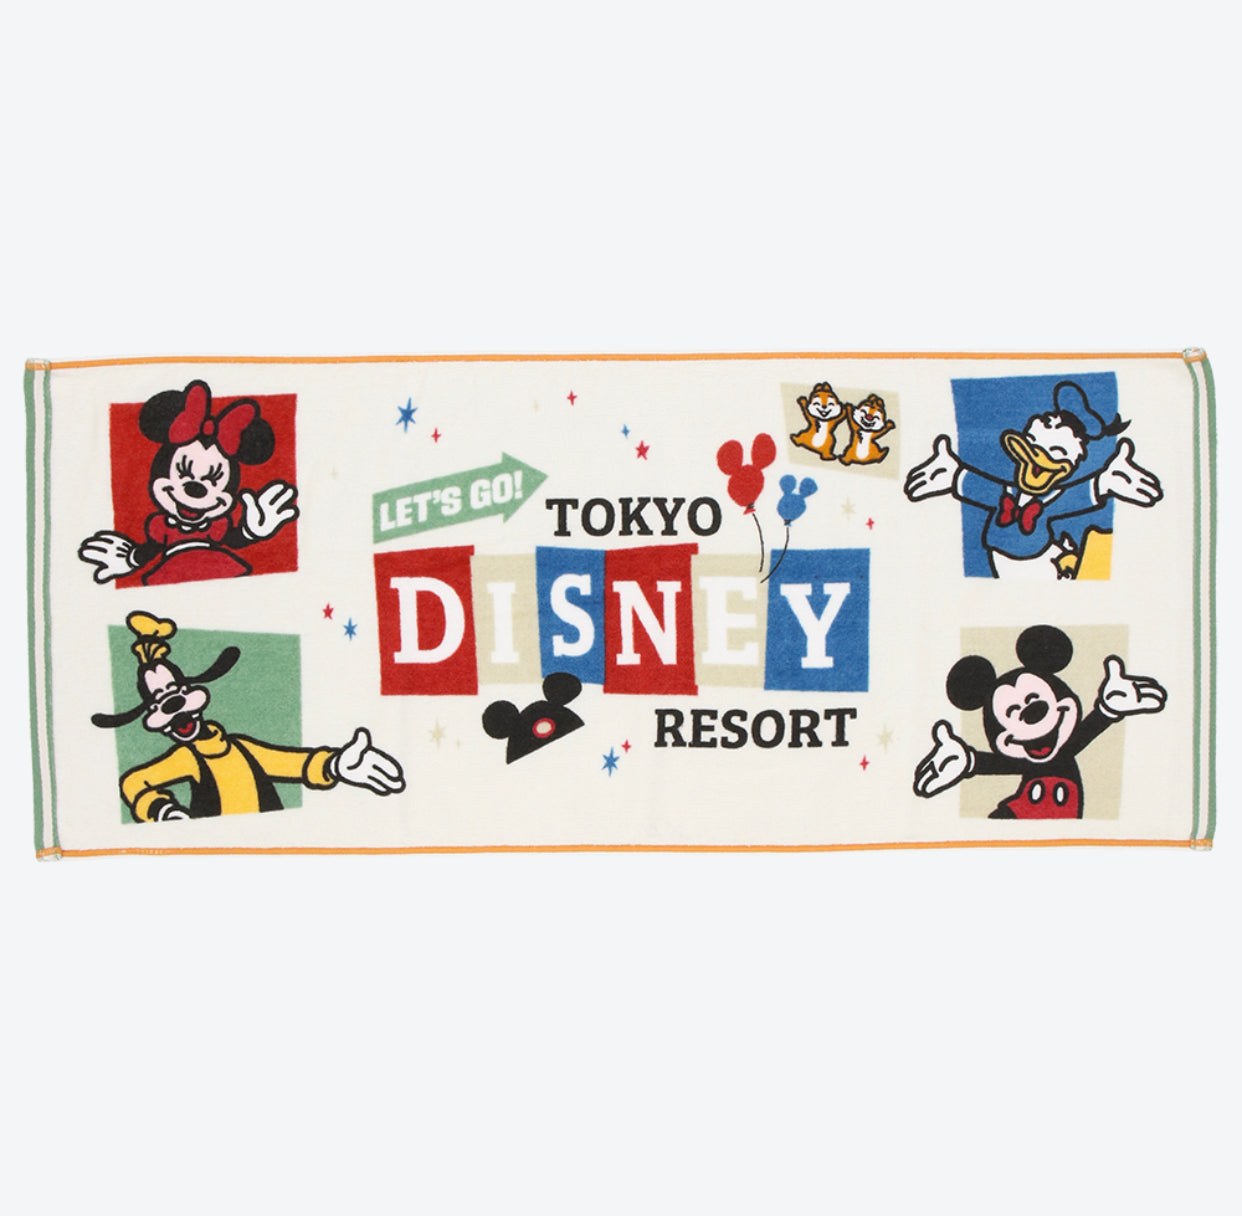 TDR - "Let's go to Tokyo Disney Resort" Collection x Mickey & Friends Face Towel (Release Date: April 25)